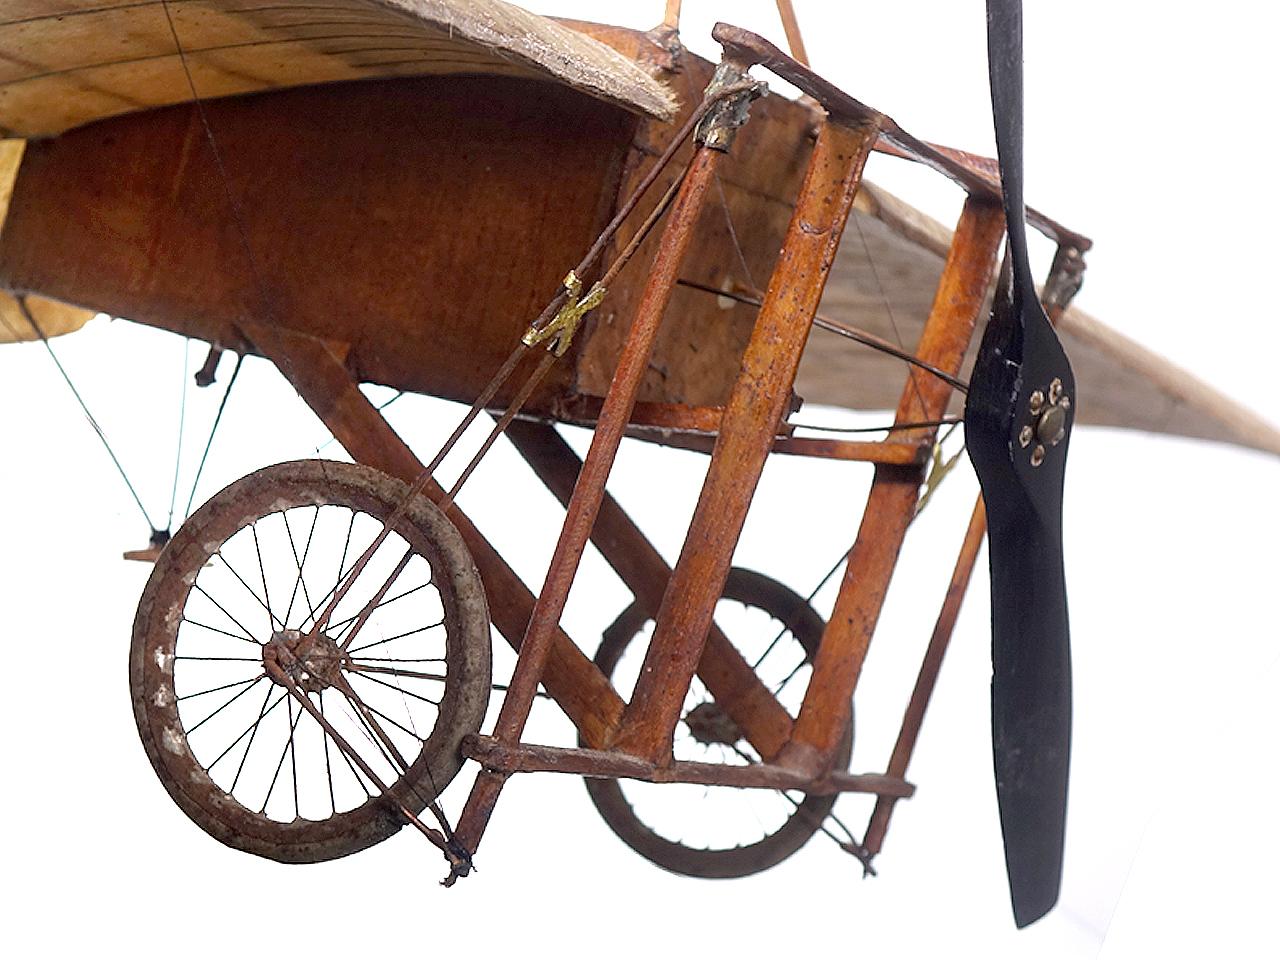 In 1909 French aviation pioneer Louis Bleriot completed the first successful crossing of the English Channel by air. The hand built model is very old and quite fragile I'm amazed it lasted this long. I am guessing this was built just after Bleriot's